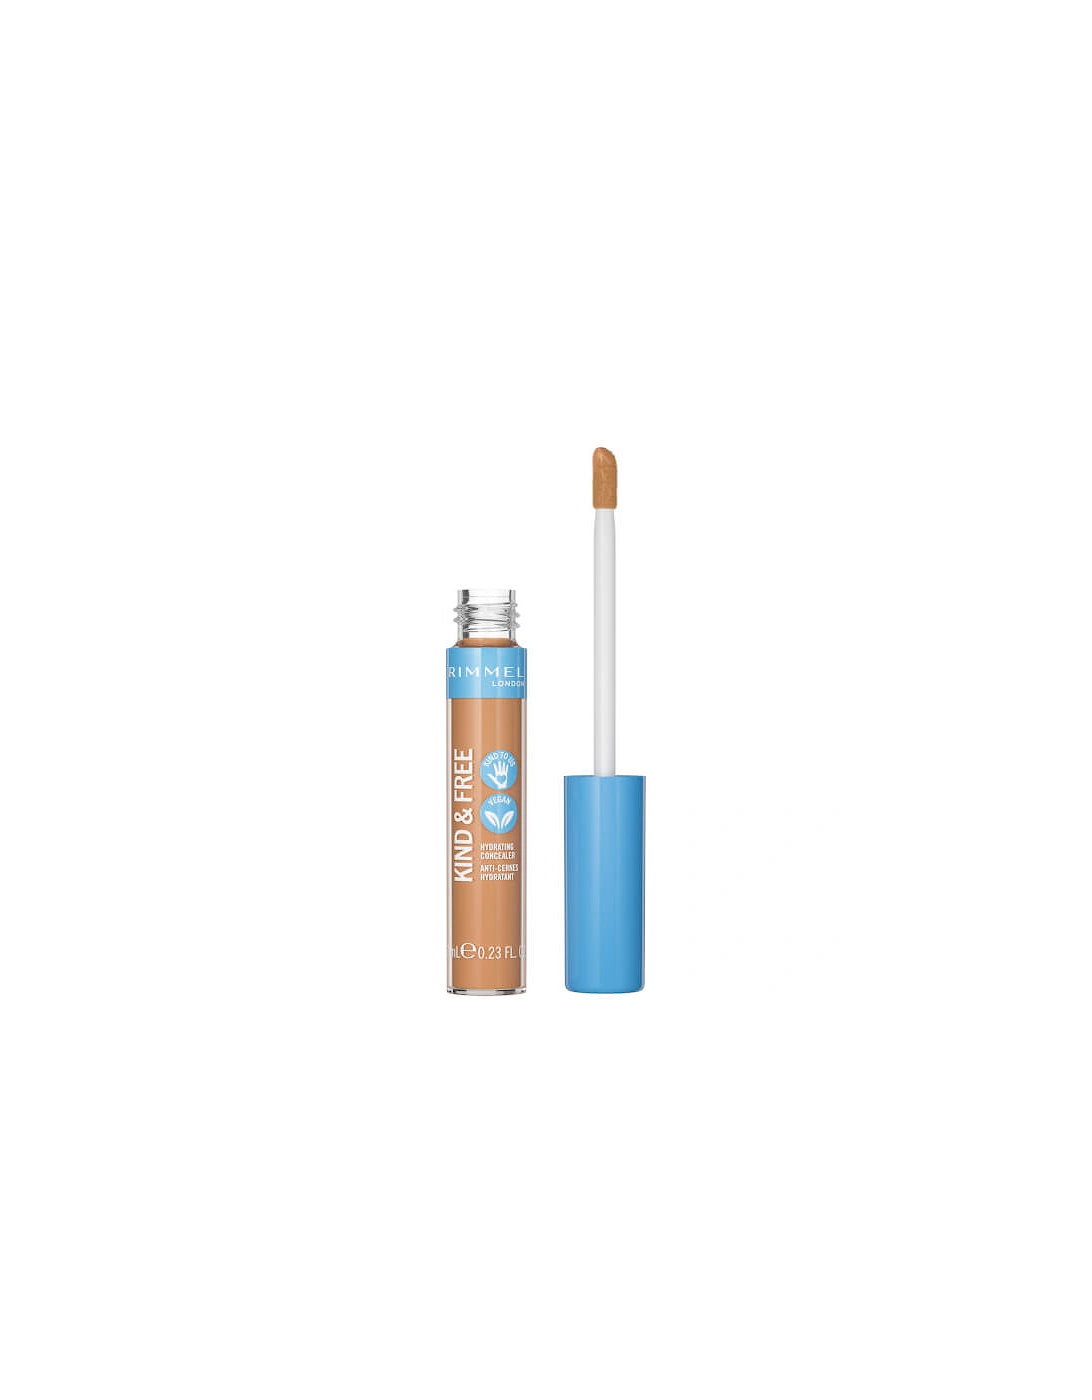 Kind and Free Hydrating Concealer - Medium, 2 of 1